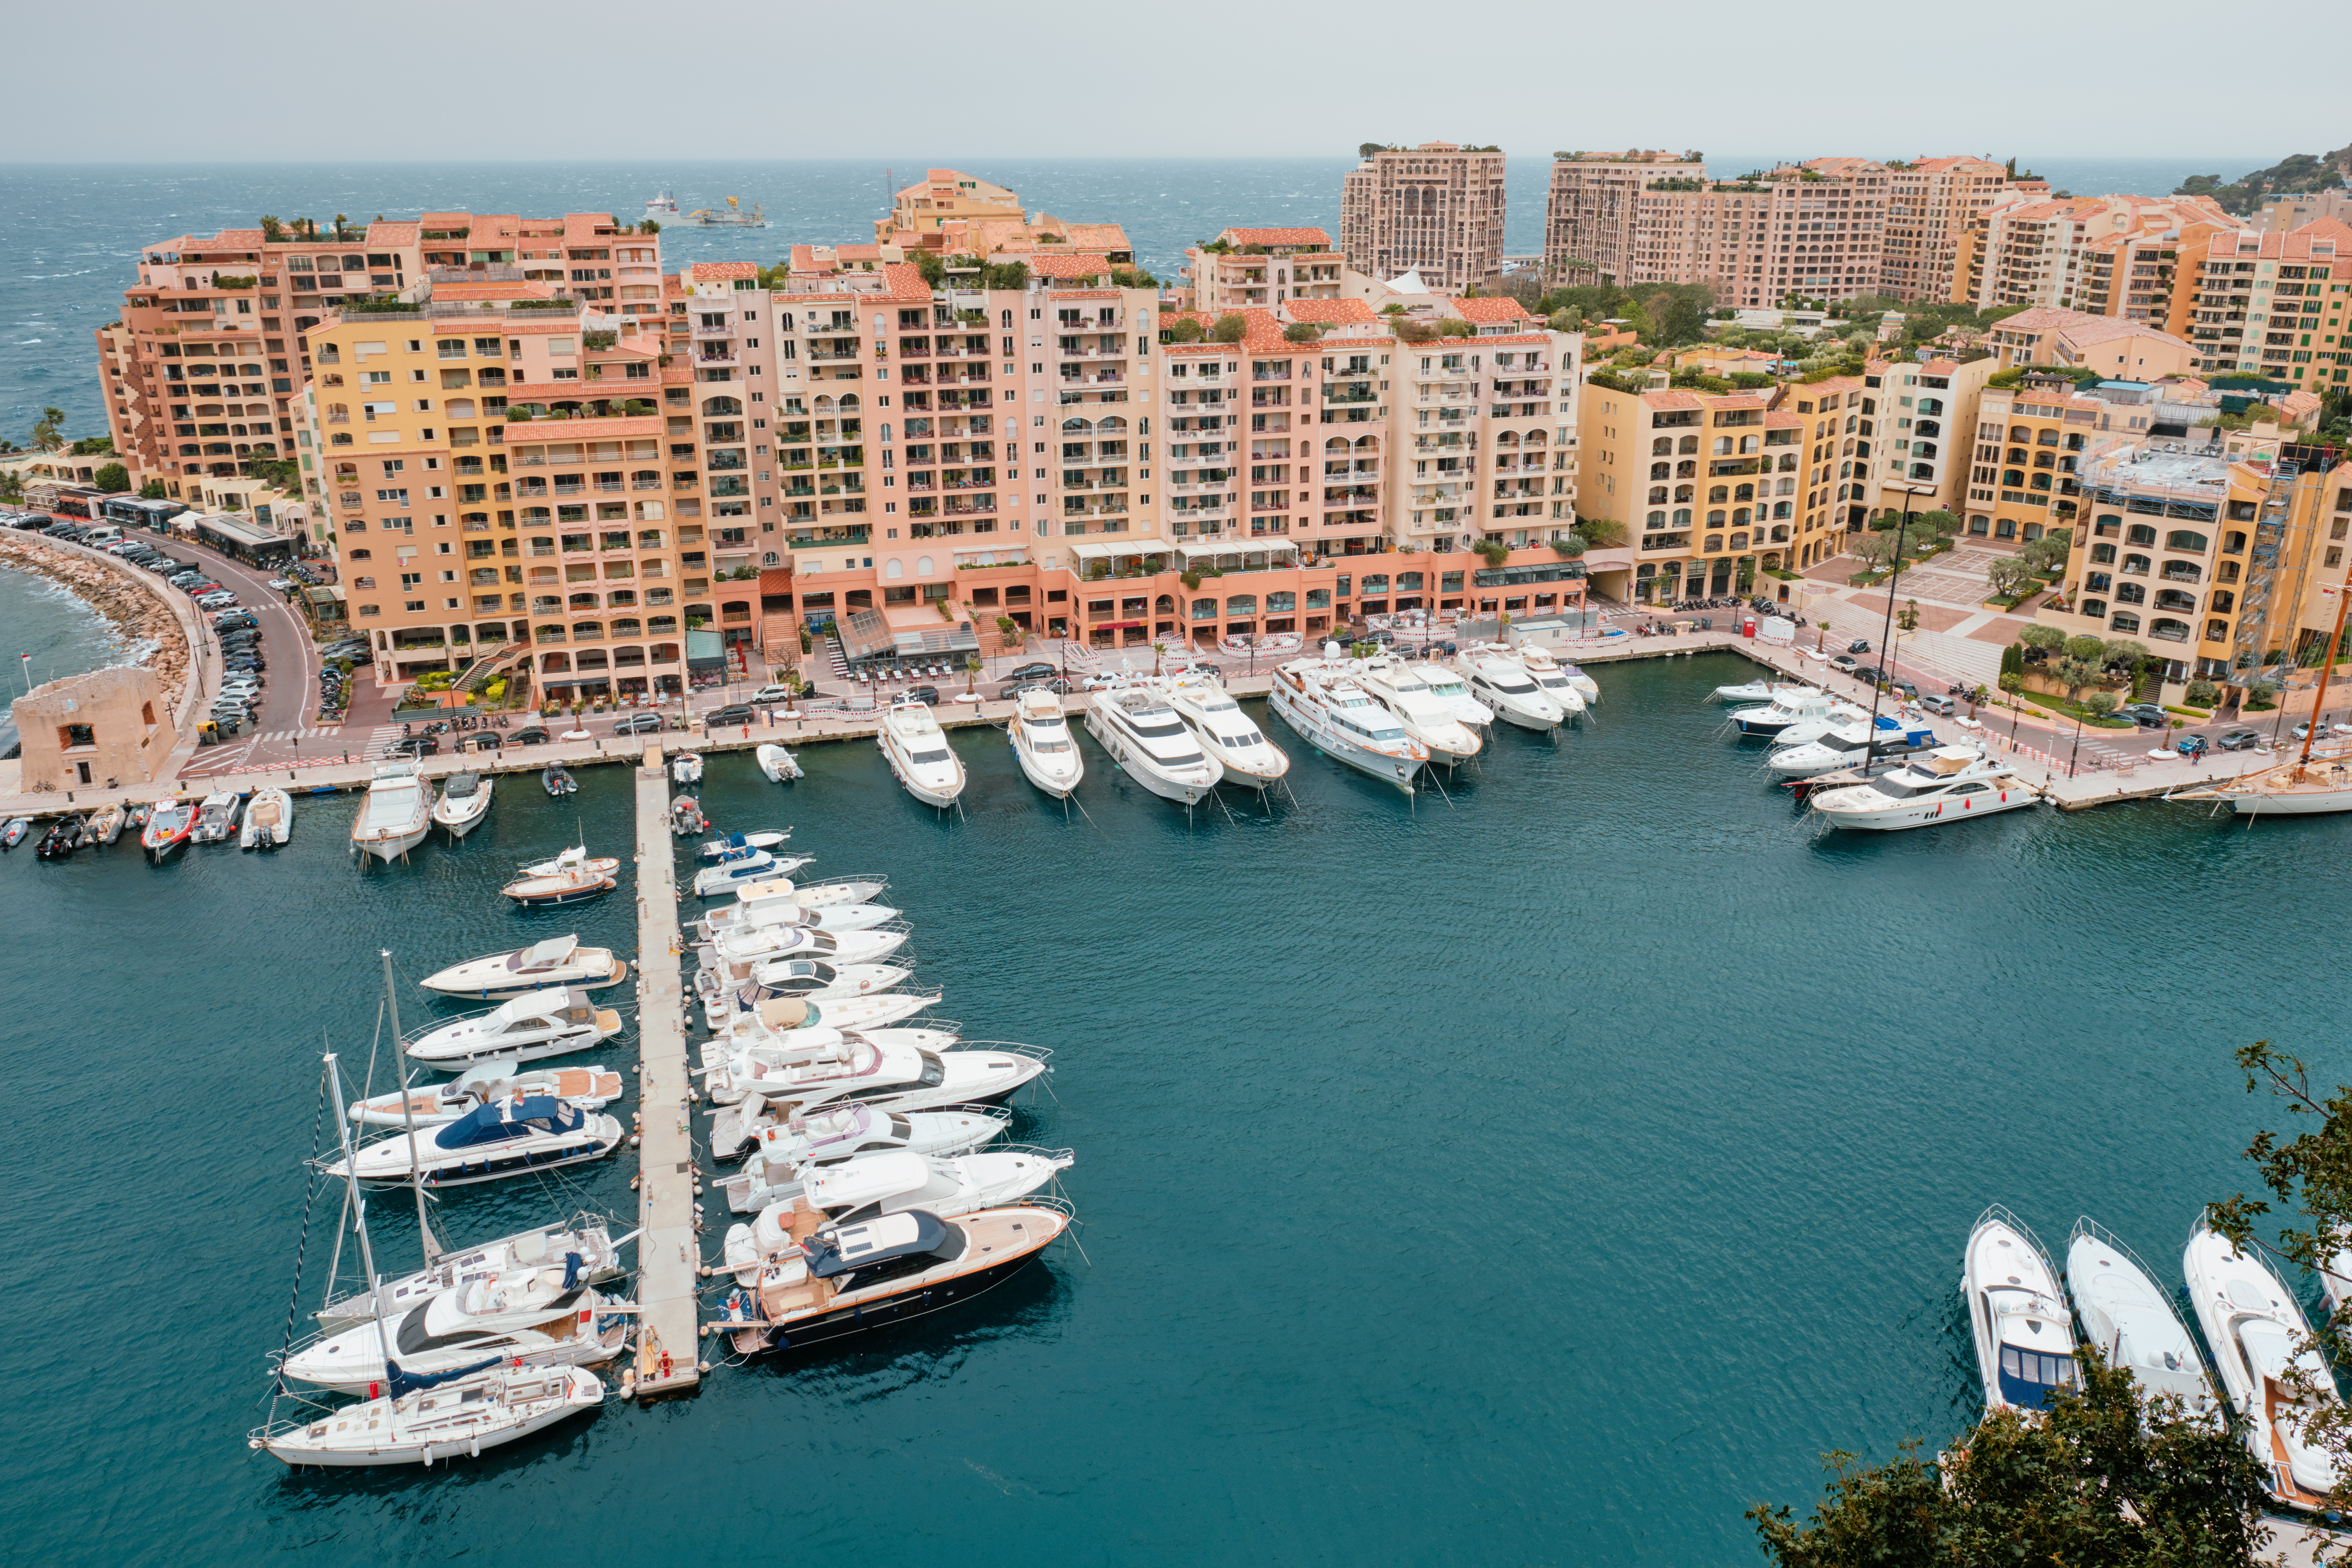 Harbor with yachts and boats in Moncte Carlo, Monaco